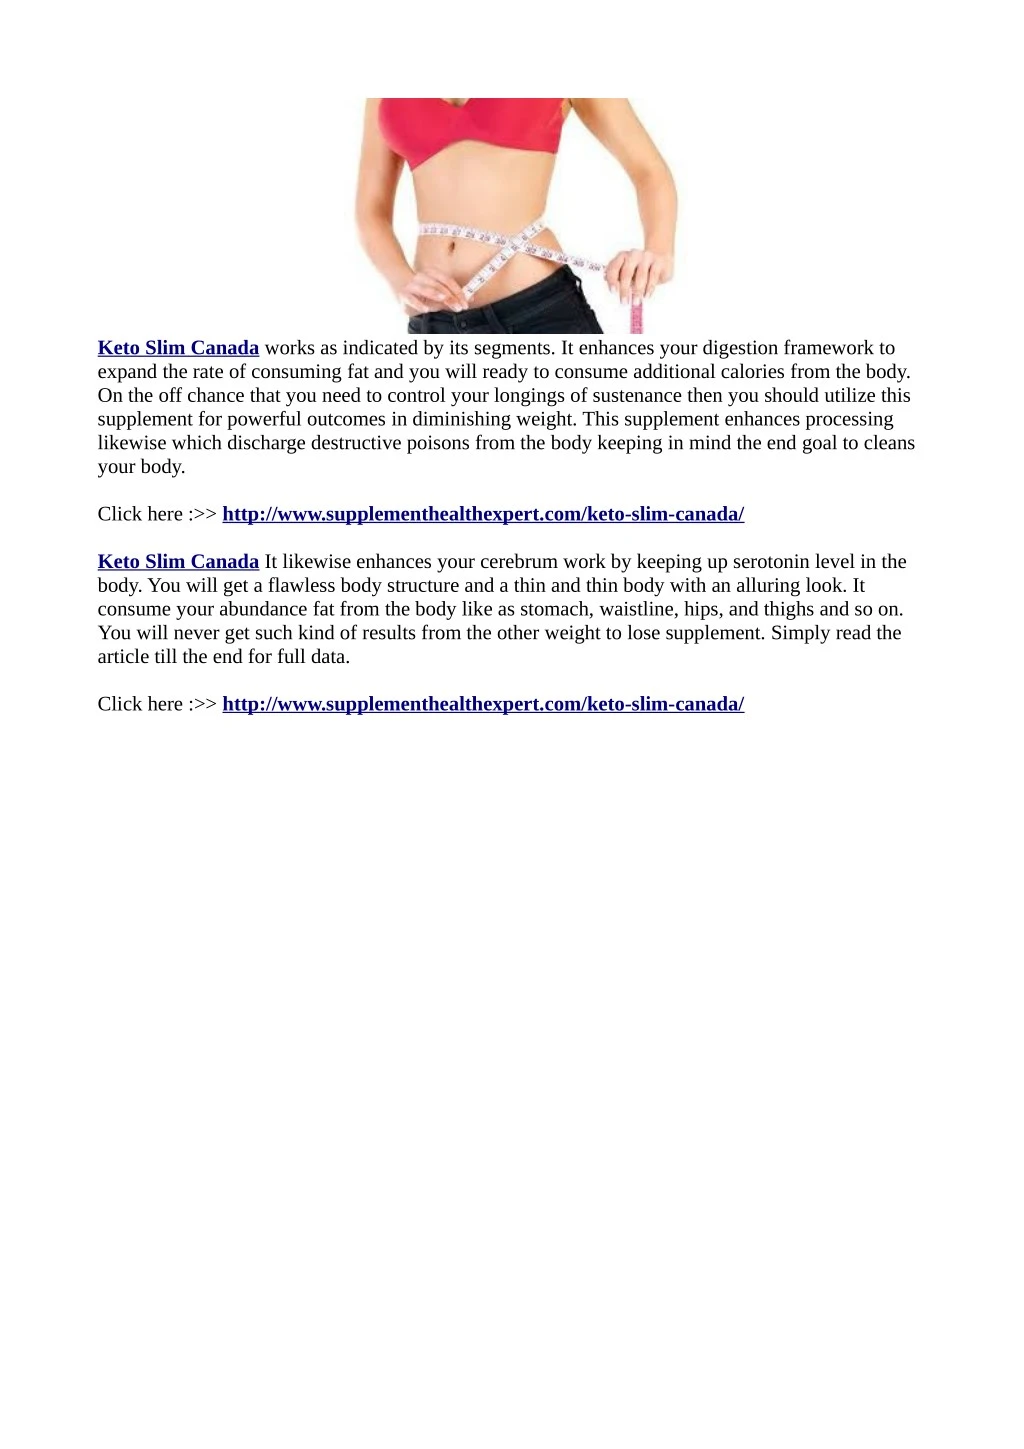 keto slim canada works as indicated